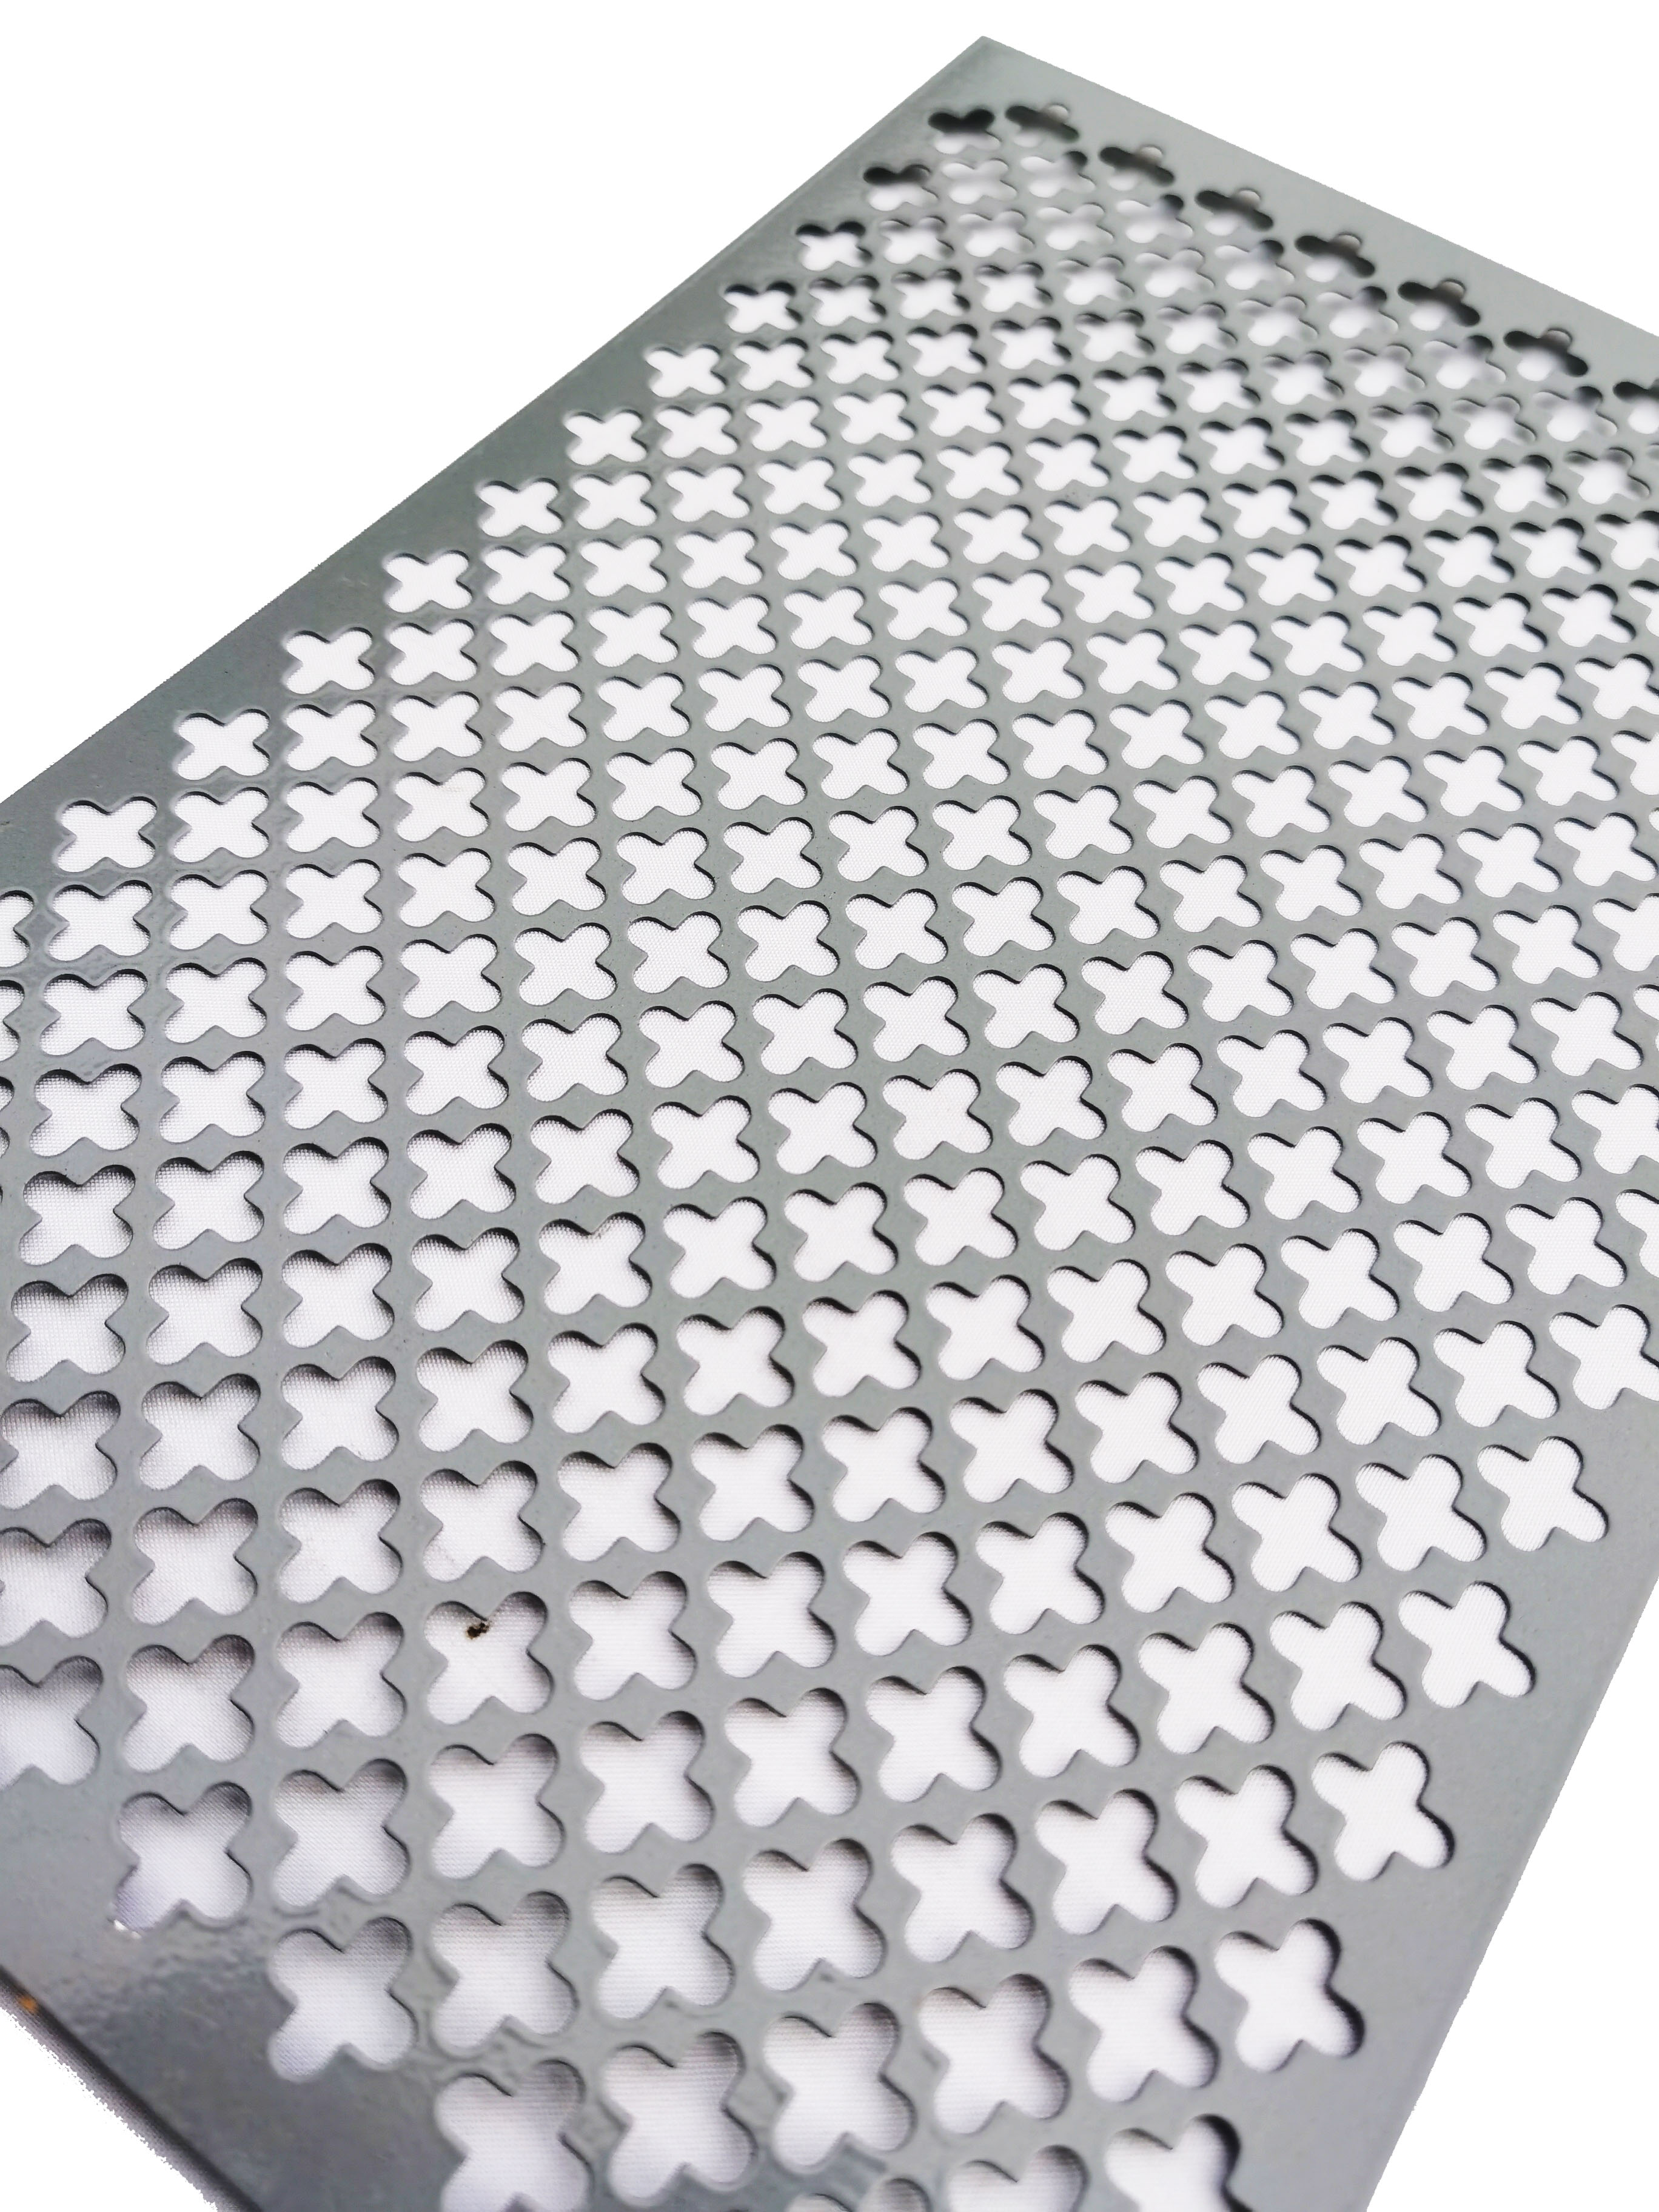 304 316 Stainless Steel Perforated Metal Sheet 